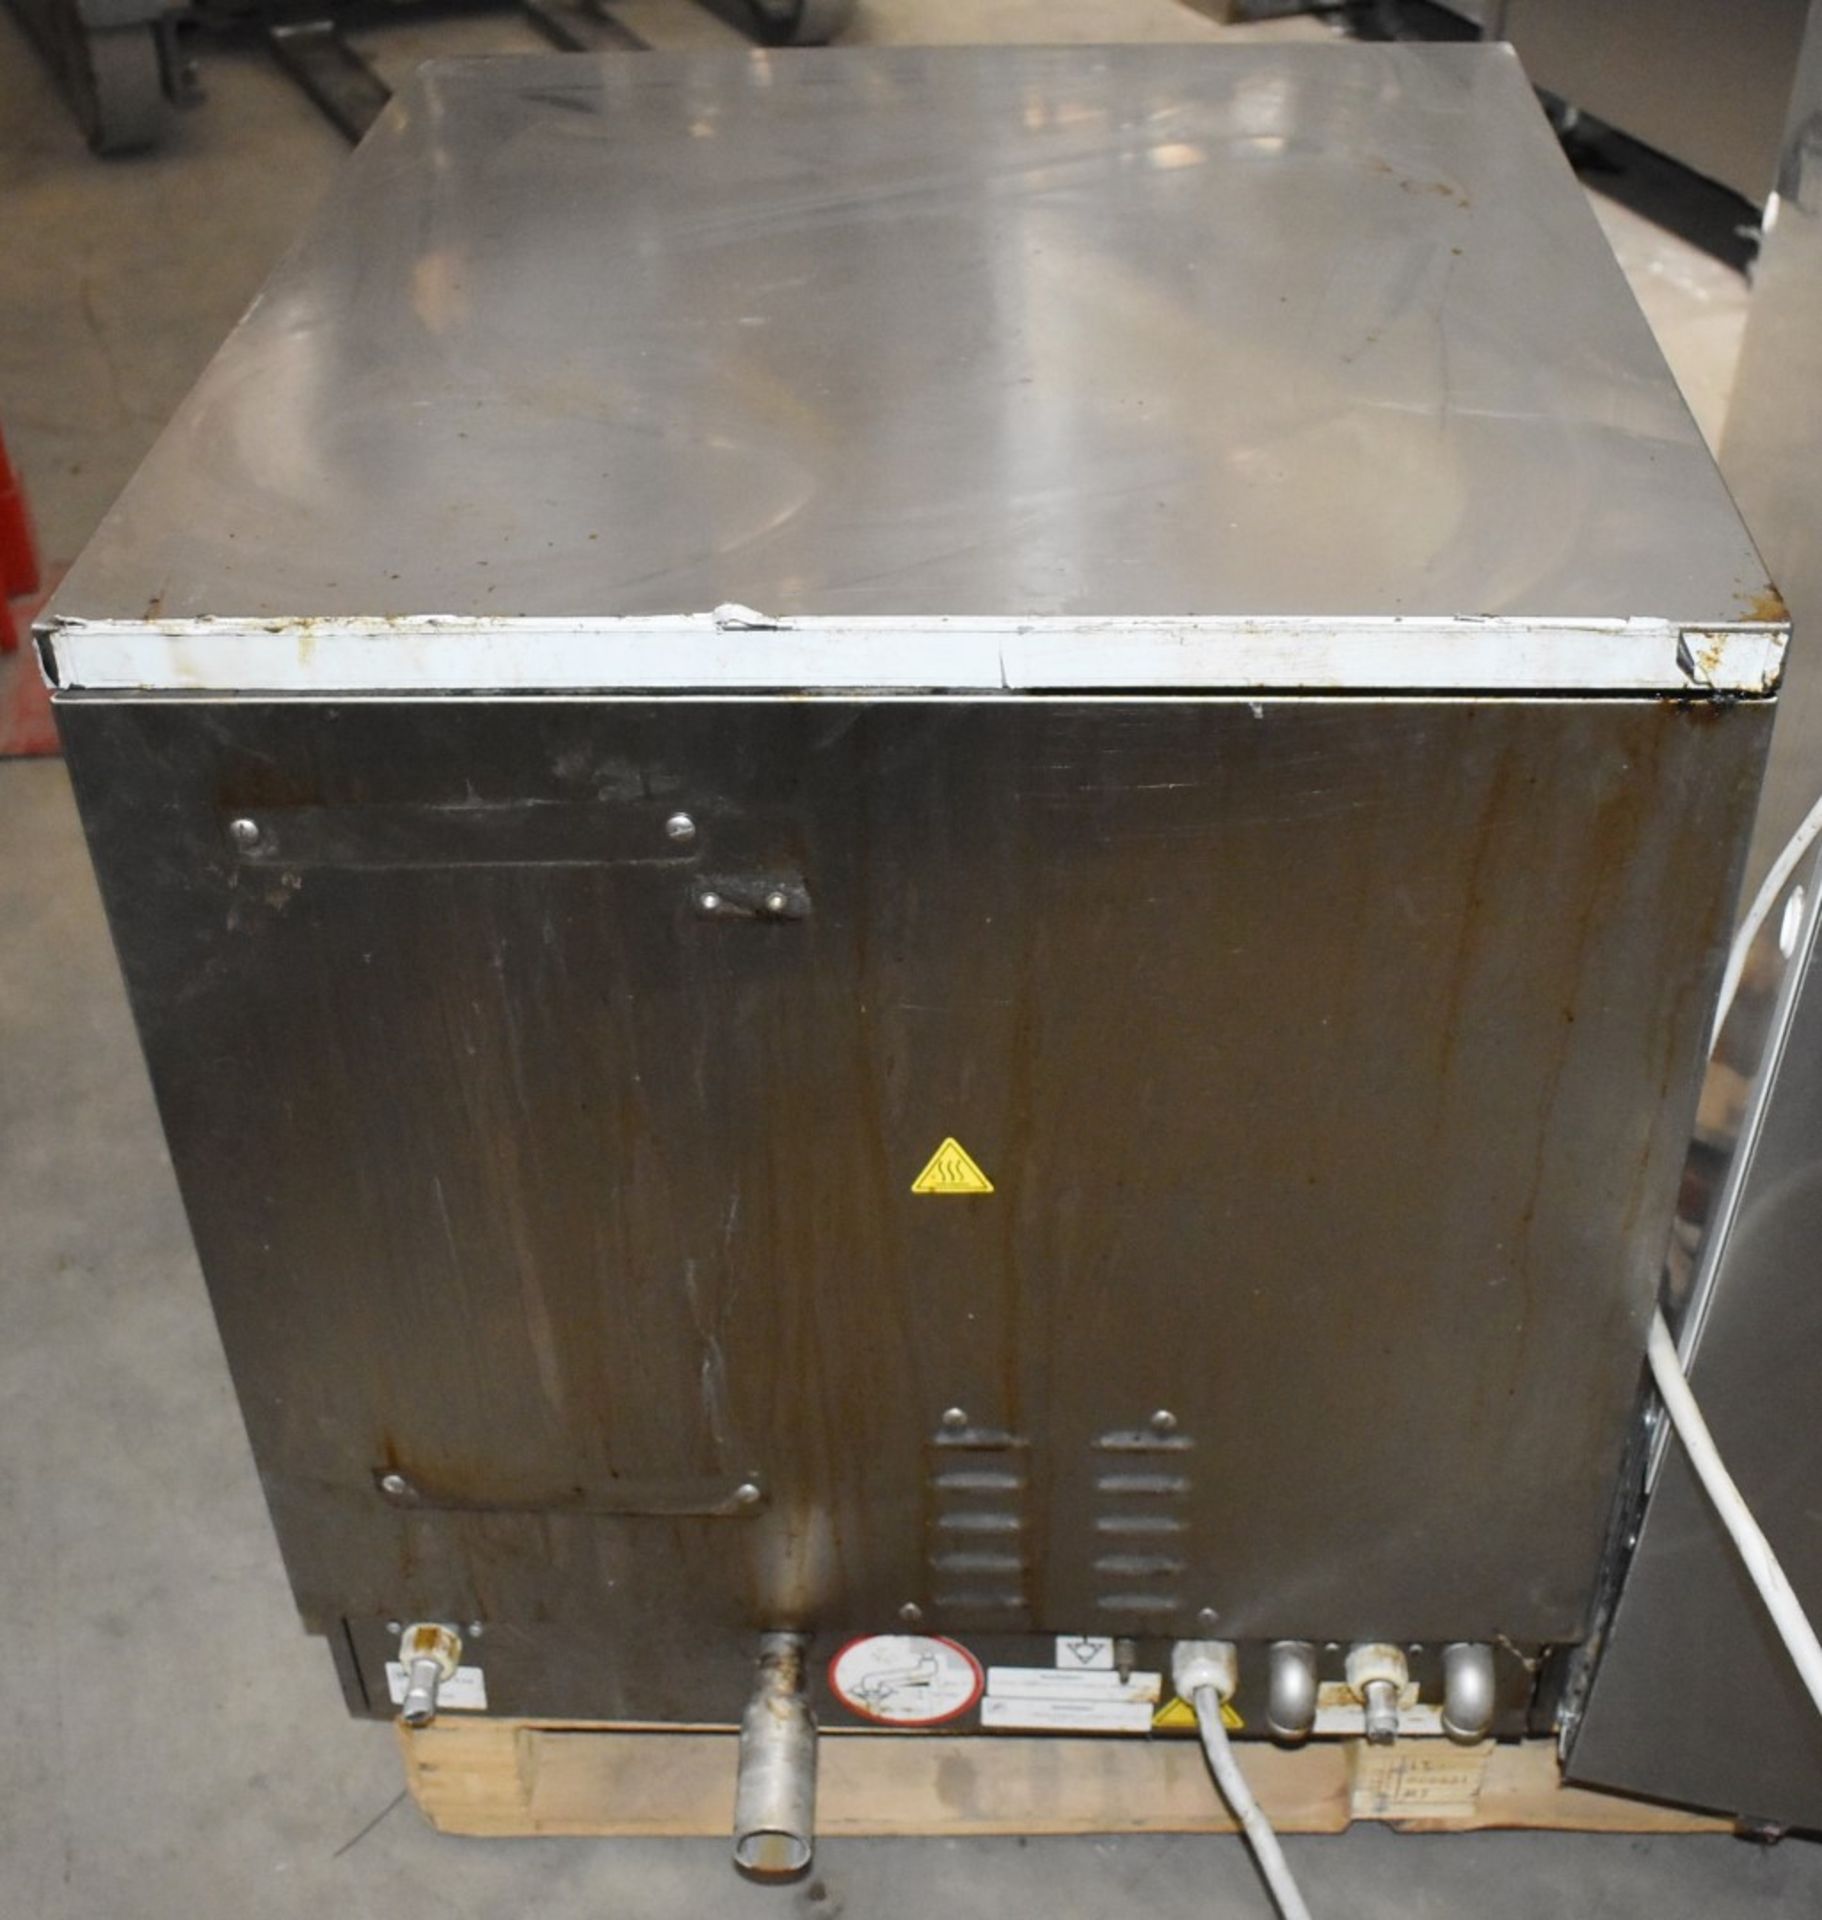 1 x Moduline Pressure Steamer Cooker - Recently Removed From a Supermarket Environment - Model - Image 6 of 8